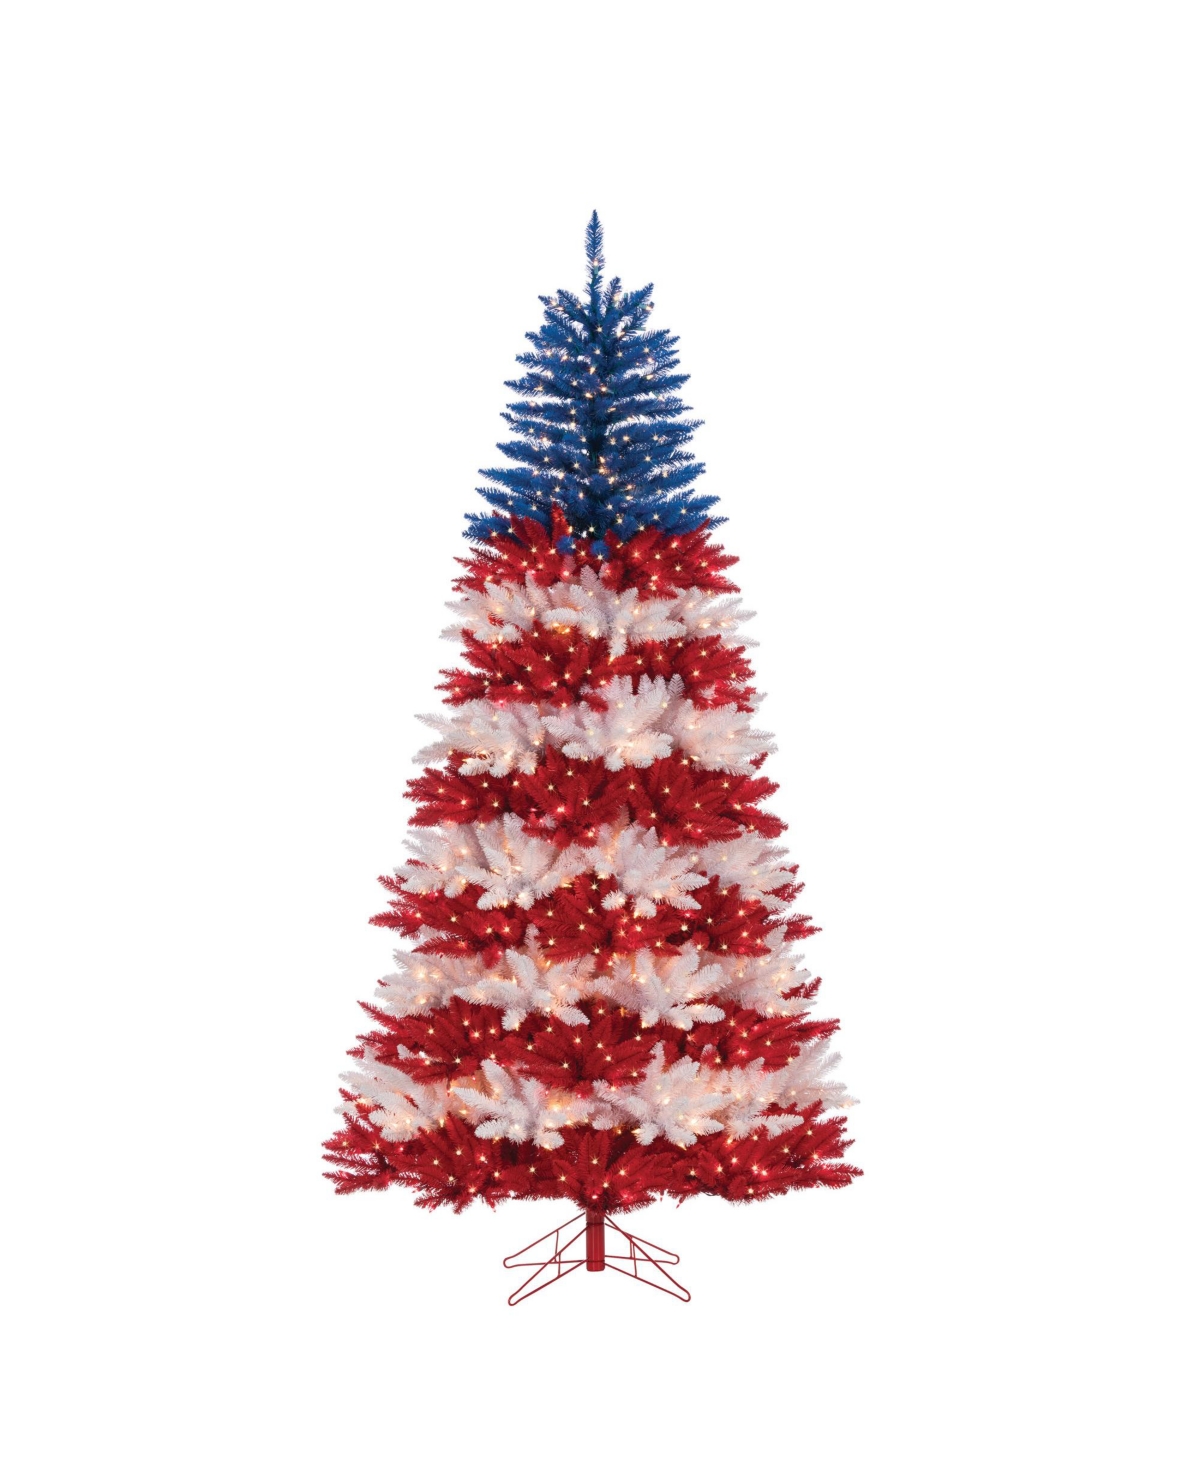 7.5Ft. Patriotic America Tree in Red, White and Blue with 1040 Clear Lights and 10 Twinke Lights on Top Section - Multicolor